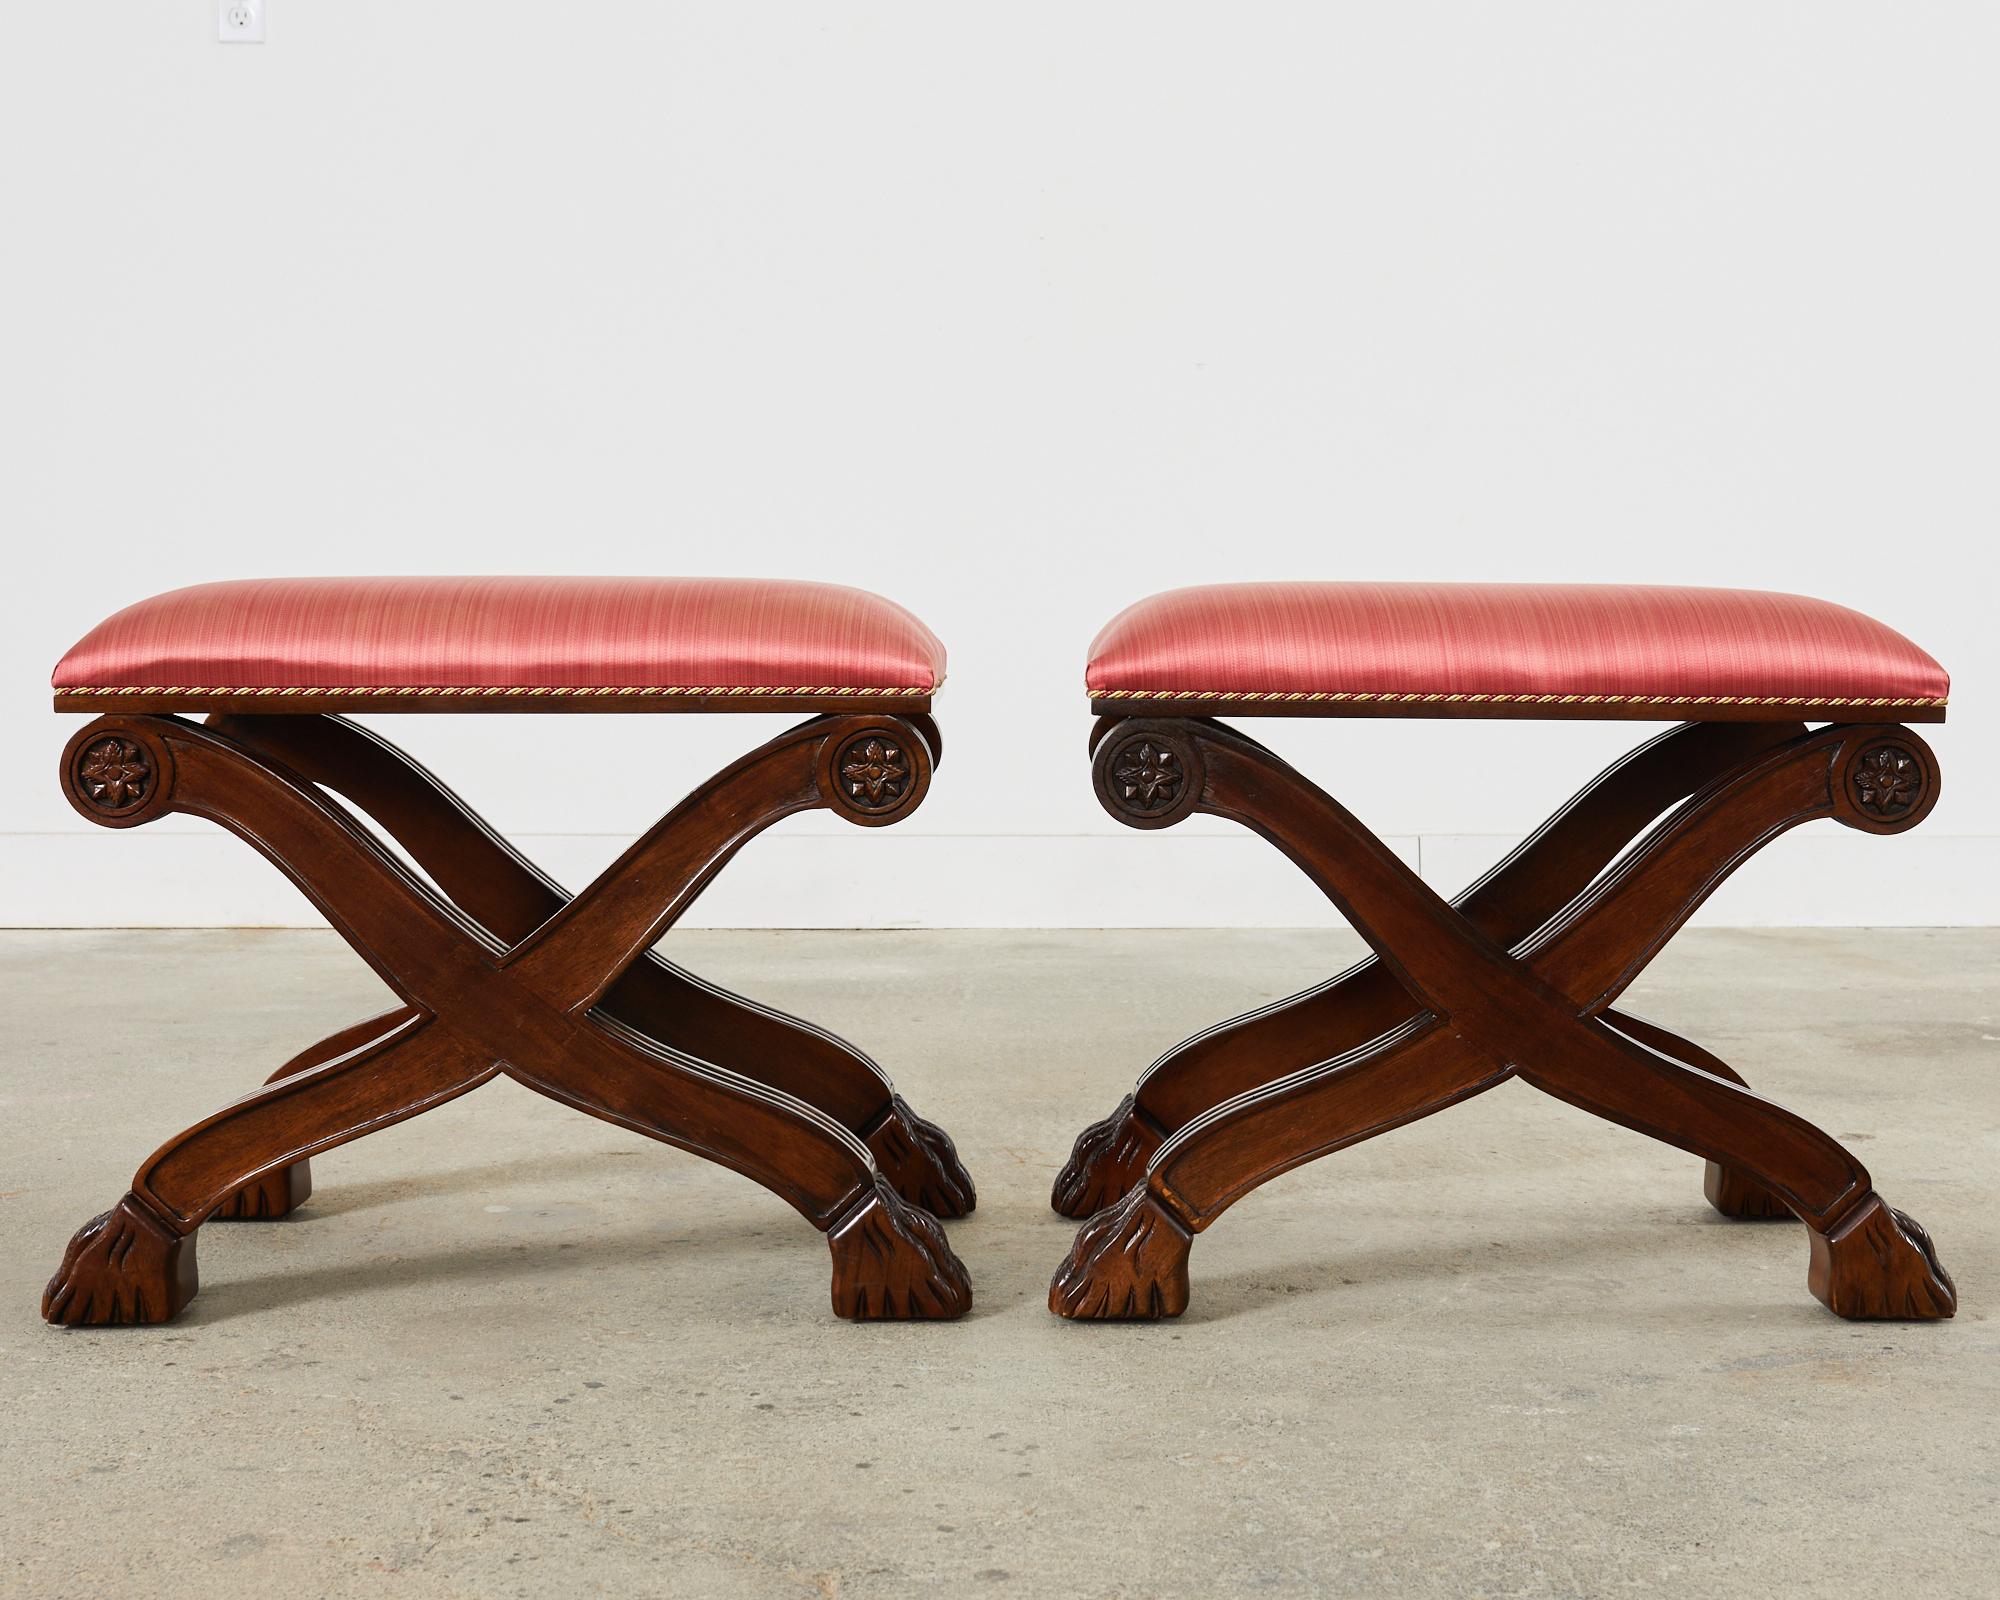 Dramatic pair of x-form curule benches or stools made in the neoclassical style by Century Furniture. The stools are crafted from a rich, walnut frame with reeded legs having carved rosettes on the tops and ending with lions paw feet. The seats are